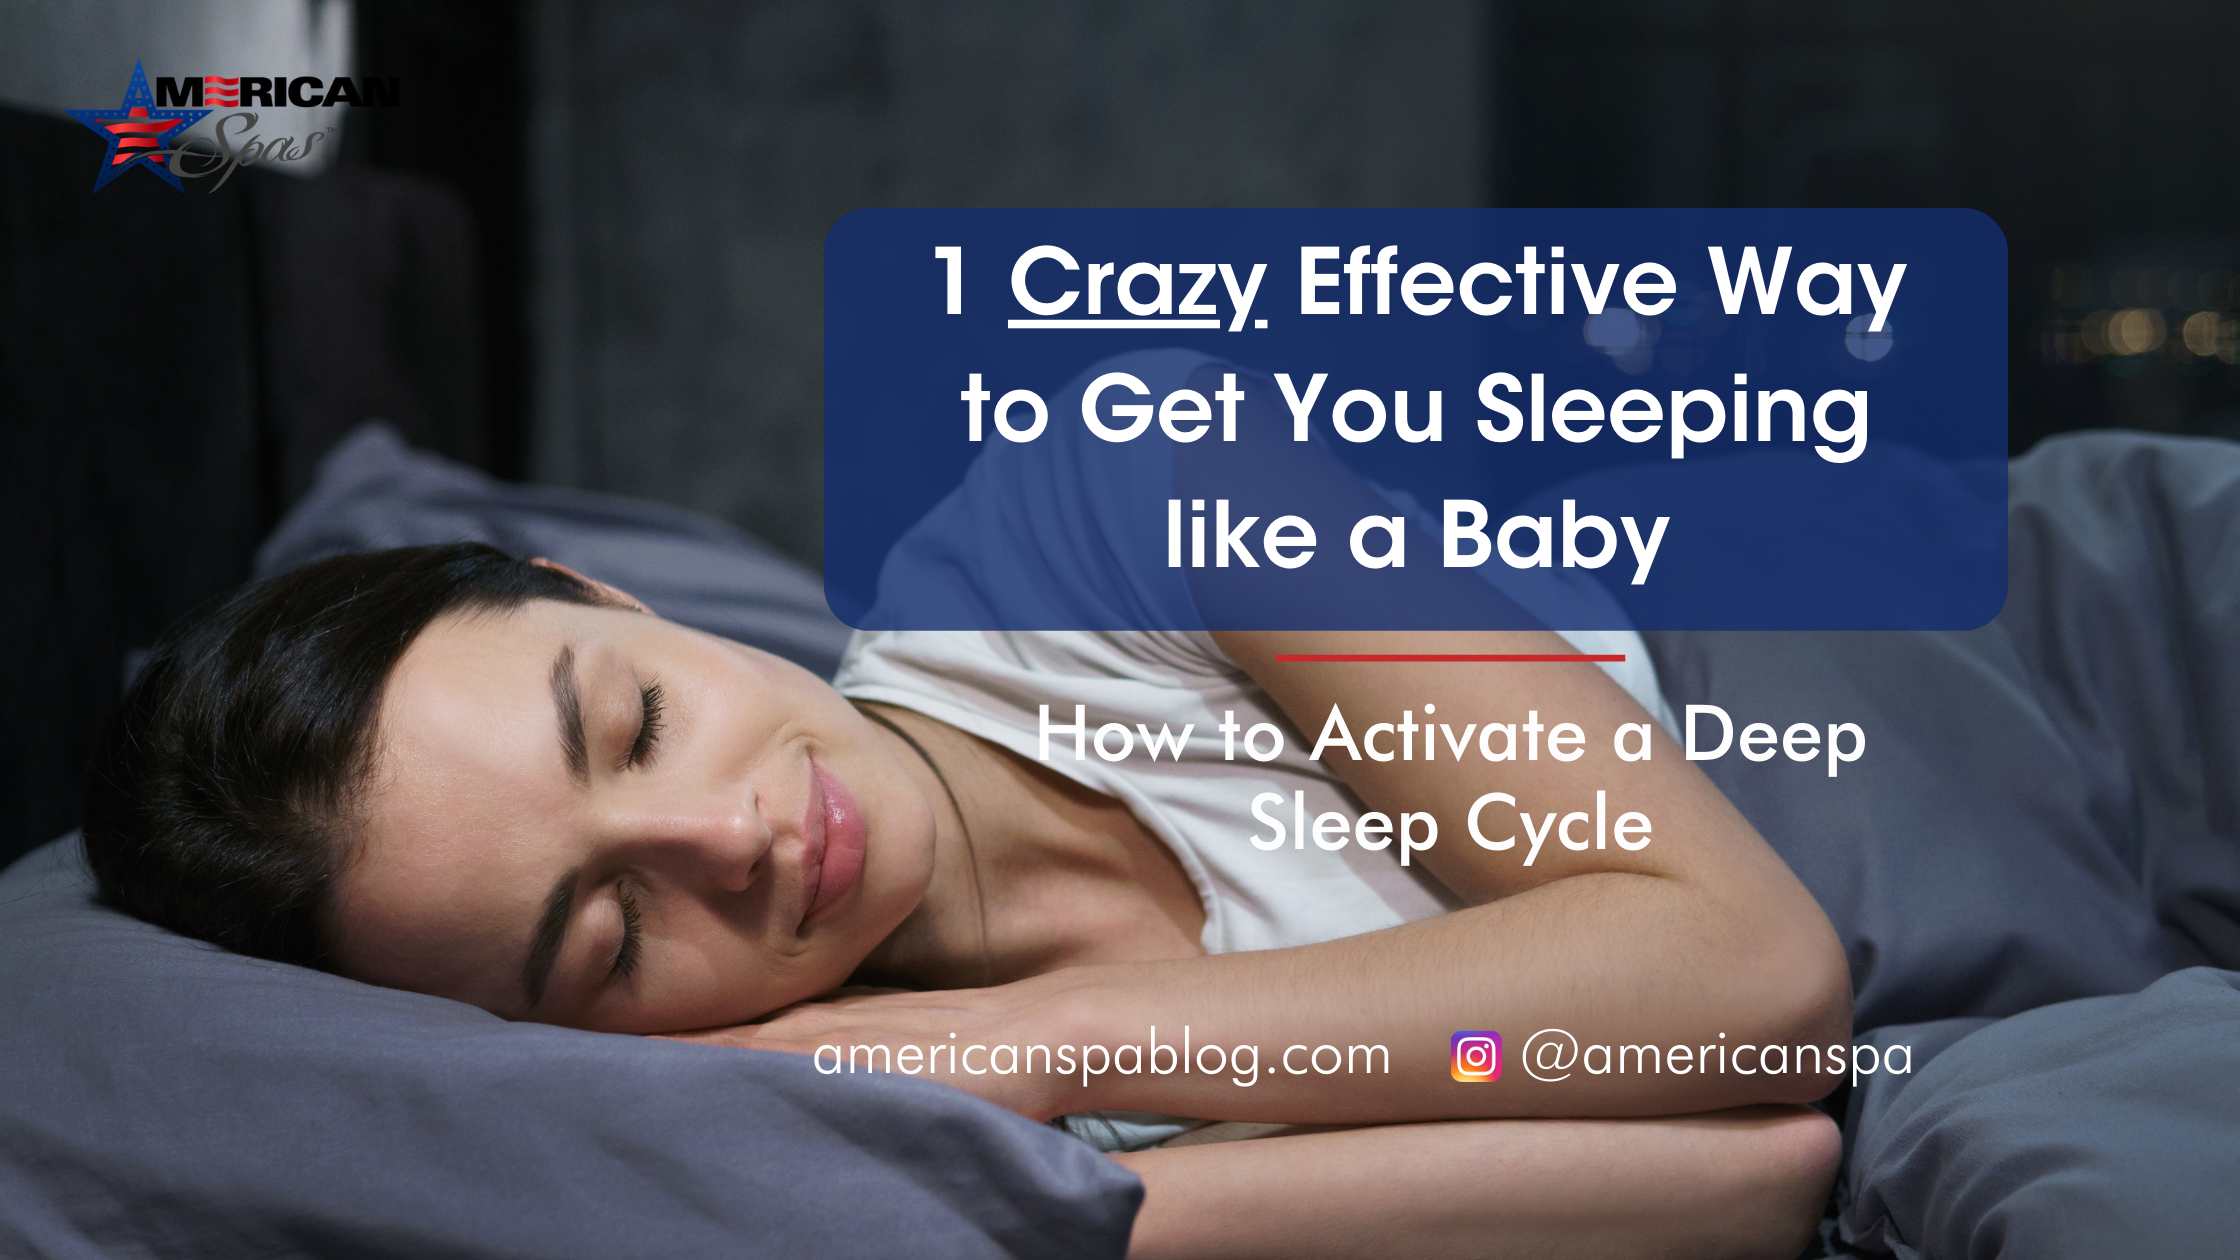 Blog Banner "1 Crazy Effective Way to Get You Sleeping like a Baby"